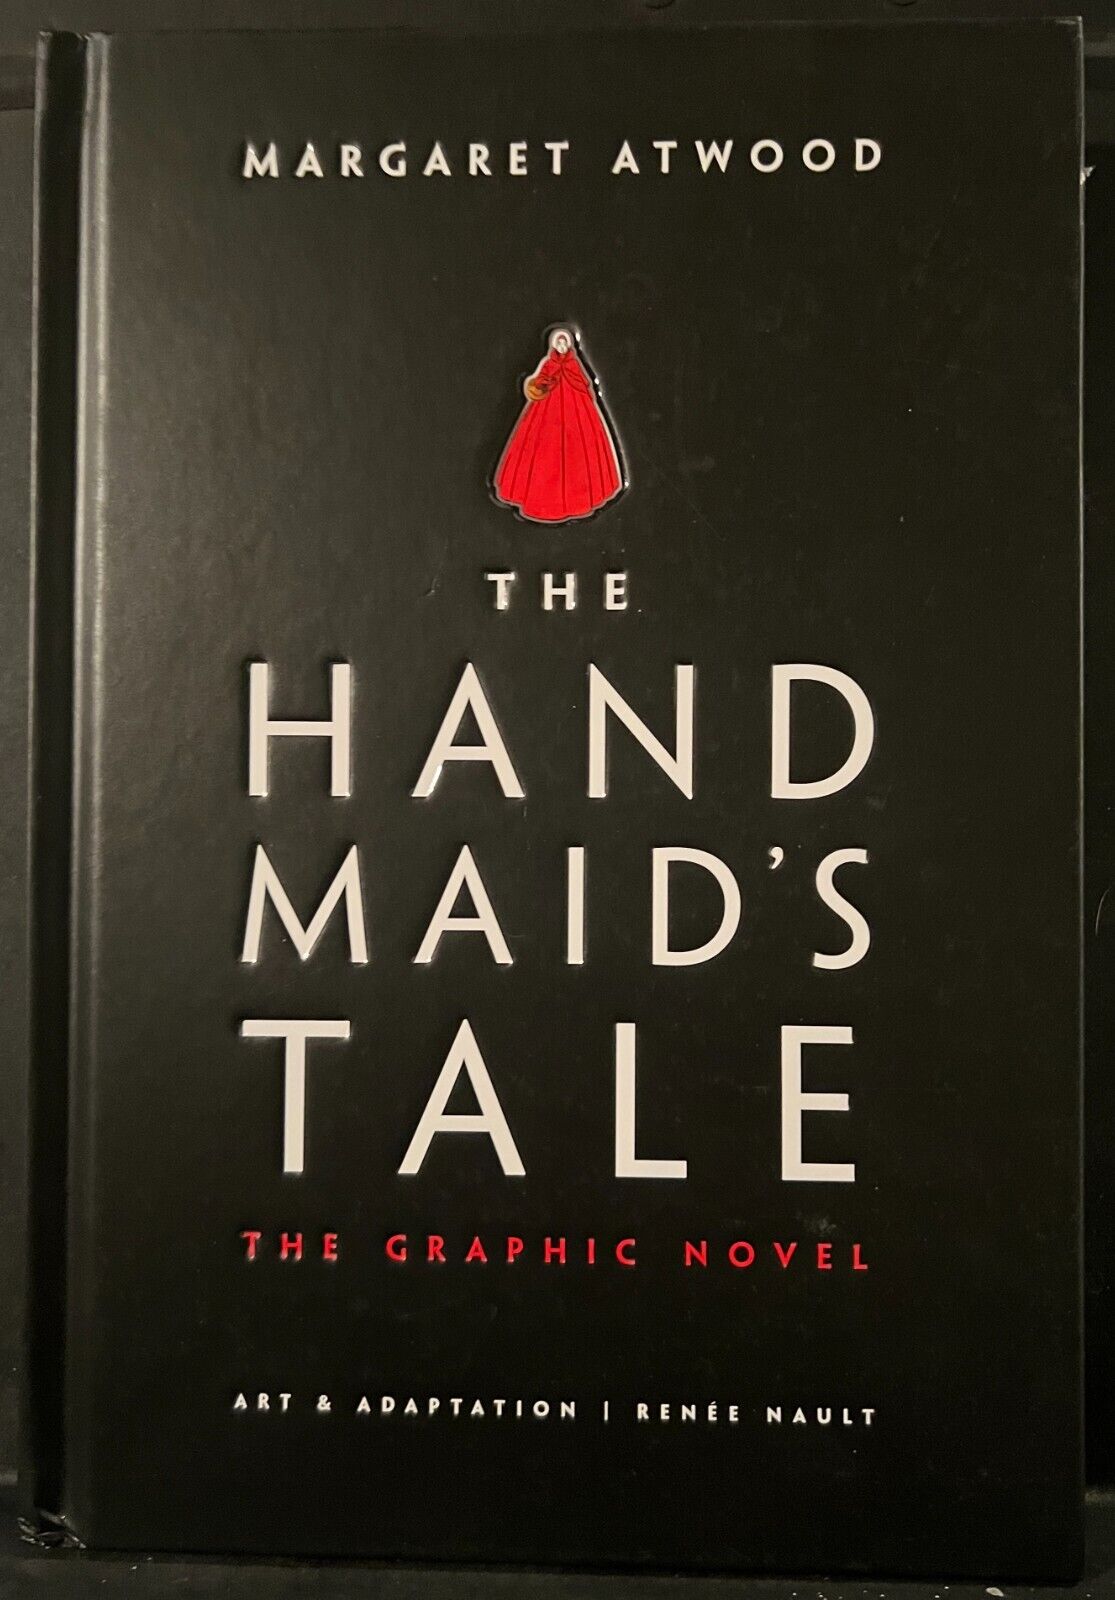 The Handmaid's Tale (Graphic Novel): A Novel (hardcover) Brand New hardcover